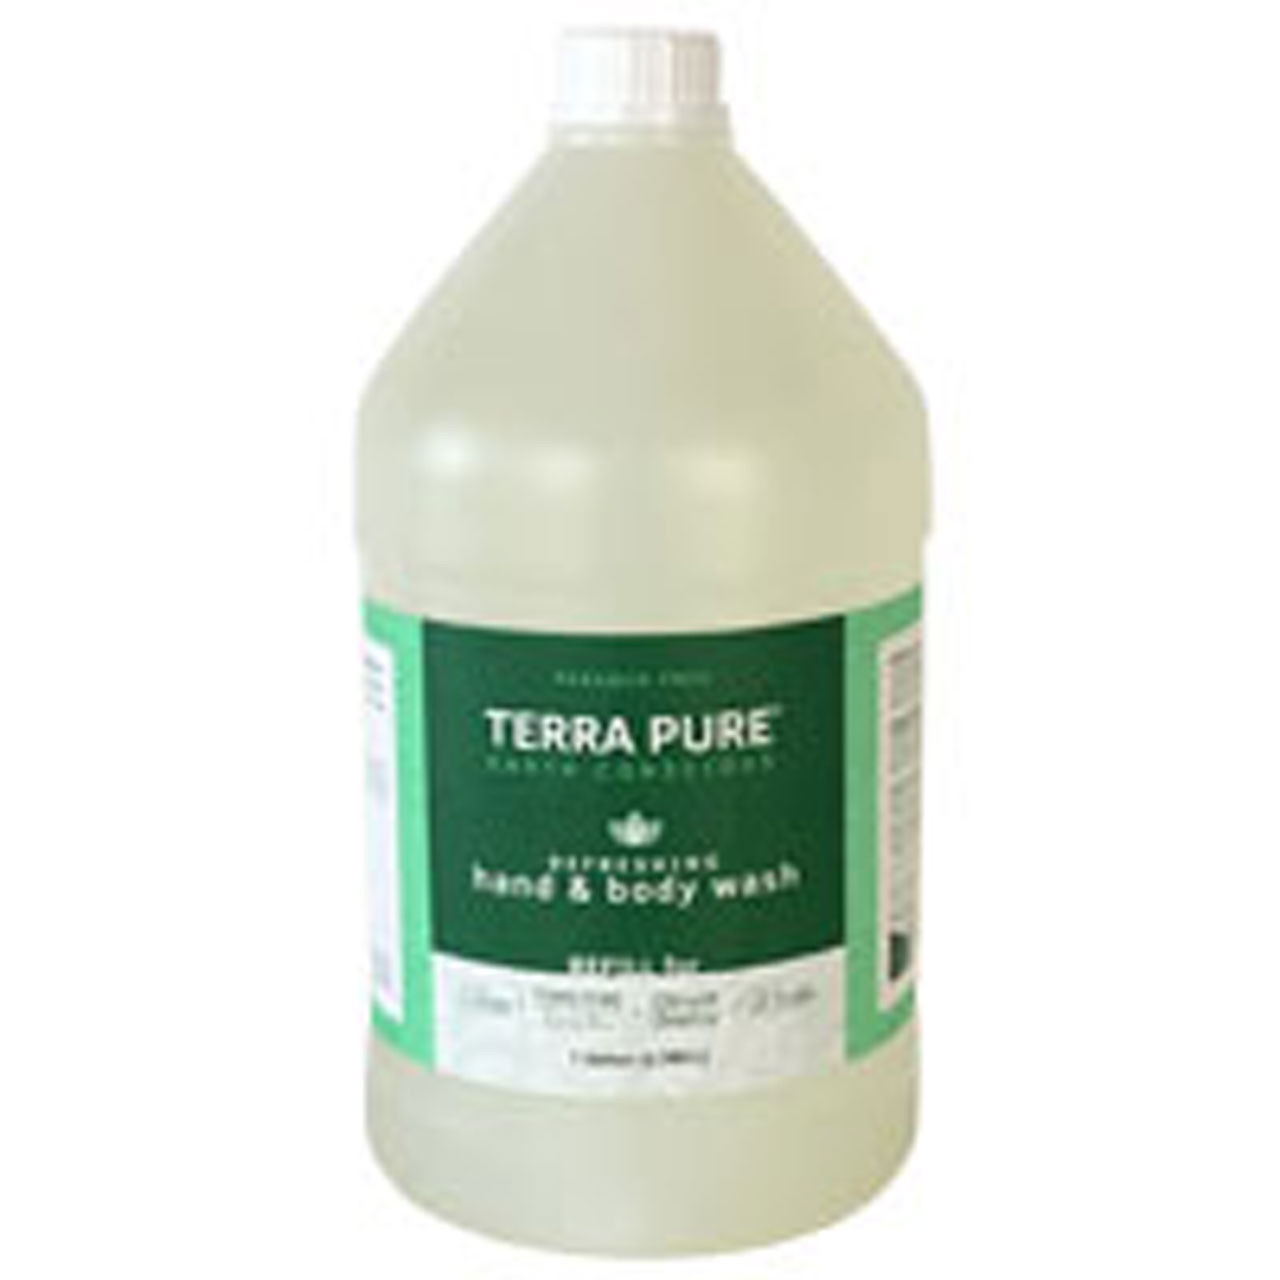 What properties does the TERRA PURE GREEN TEA BULK from the TERRA PURE® GREEN TEA™ collection have?